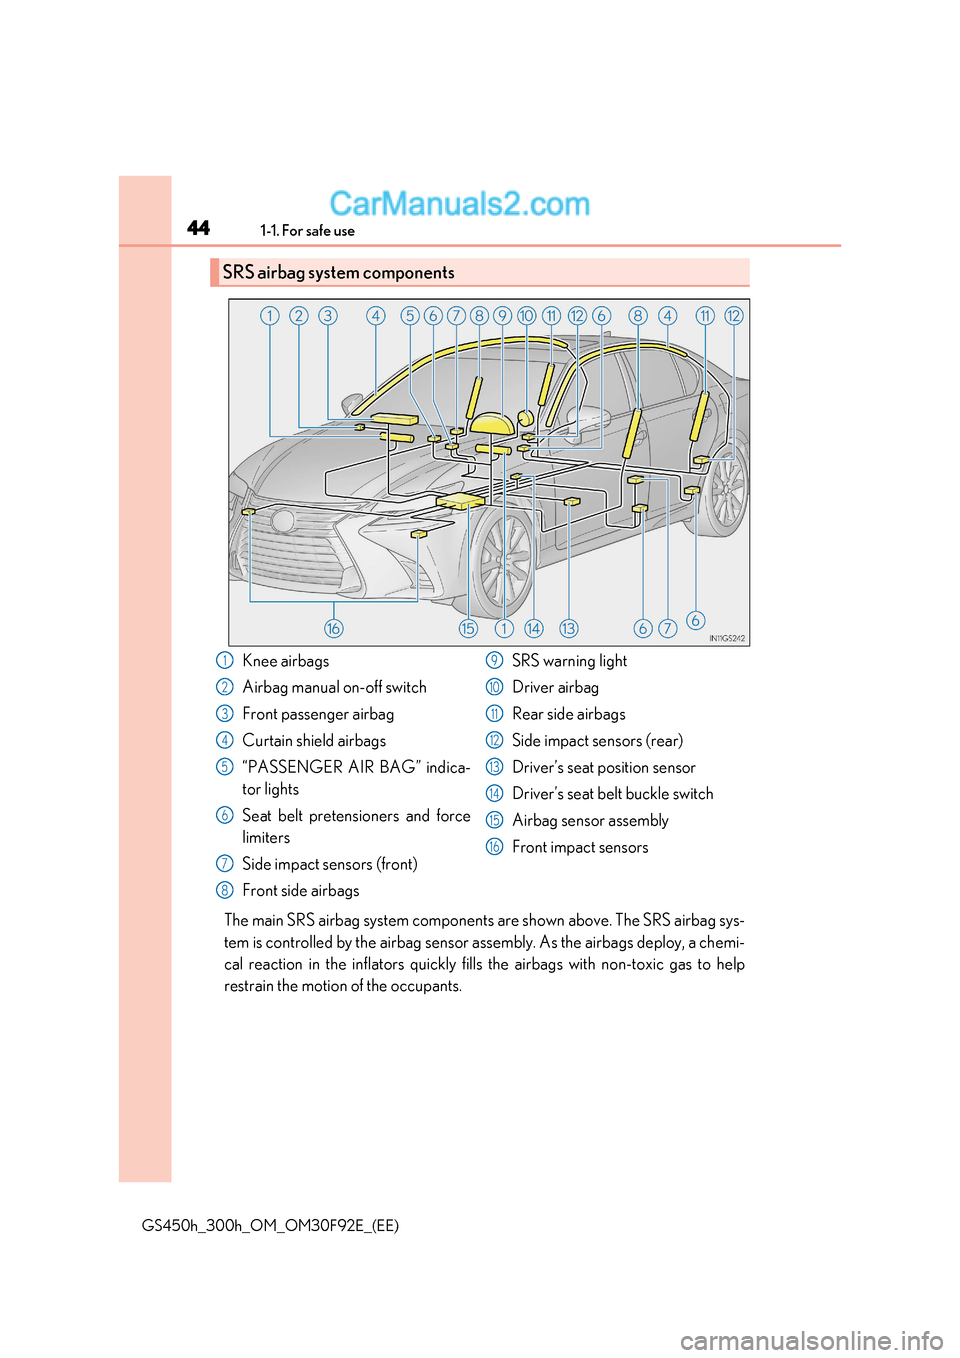 Lexus GS300h 2017 User Guide 441-1. For safe use
GS450h_300h_OM_OM30F92E_(EE) The main SRS airbag system components are shown above. The SRS airbag sys- 
tem is controlled by the airbag sensor assembly. As the airbags deploy, a c